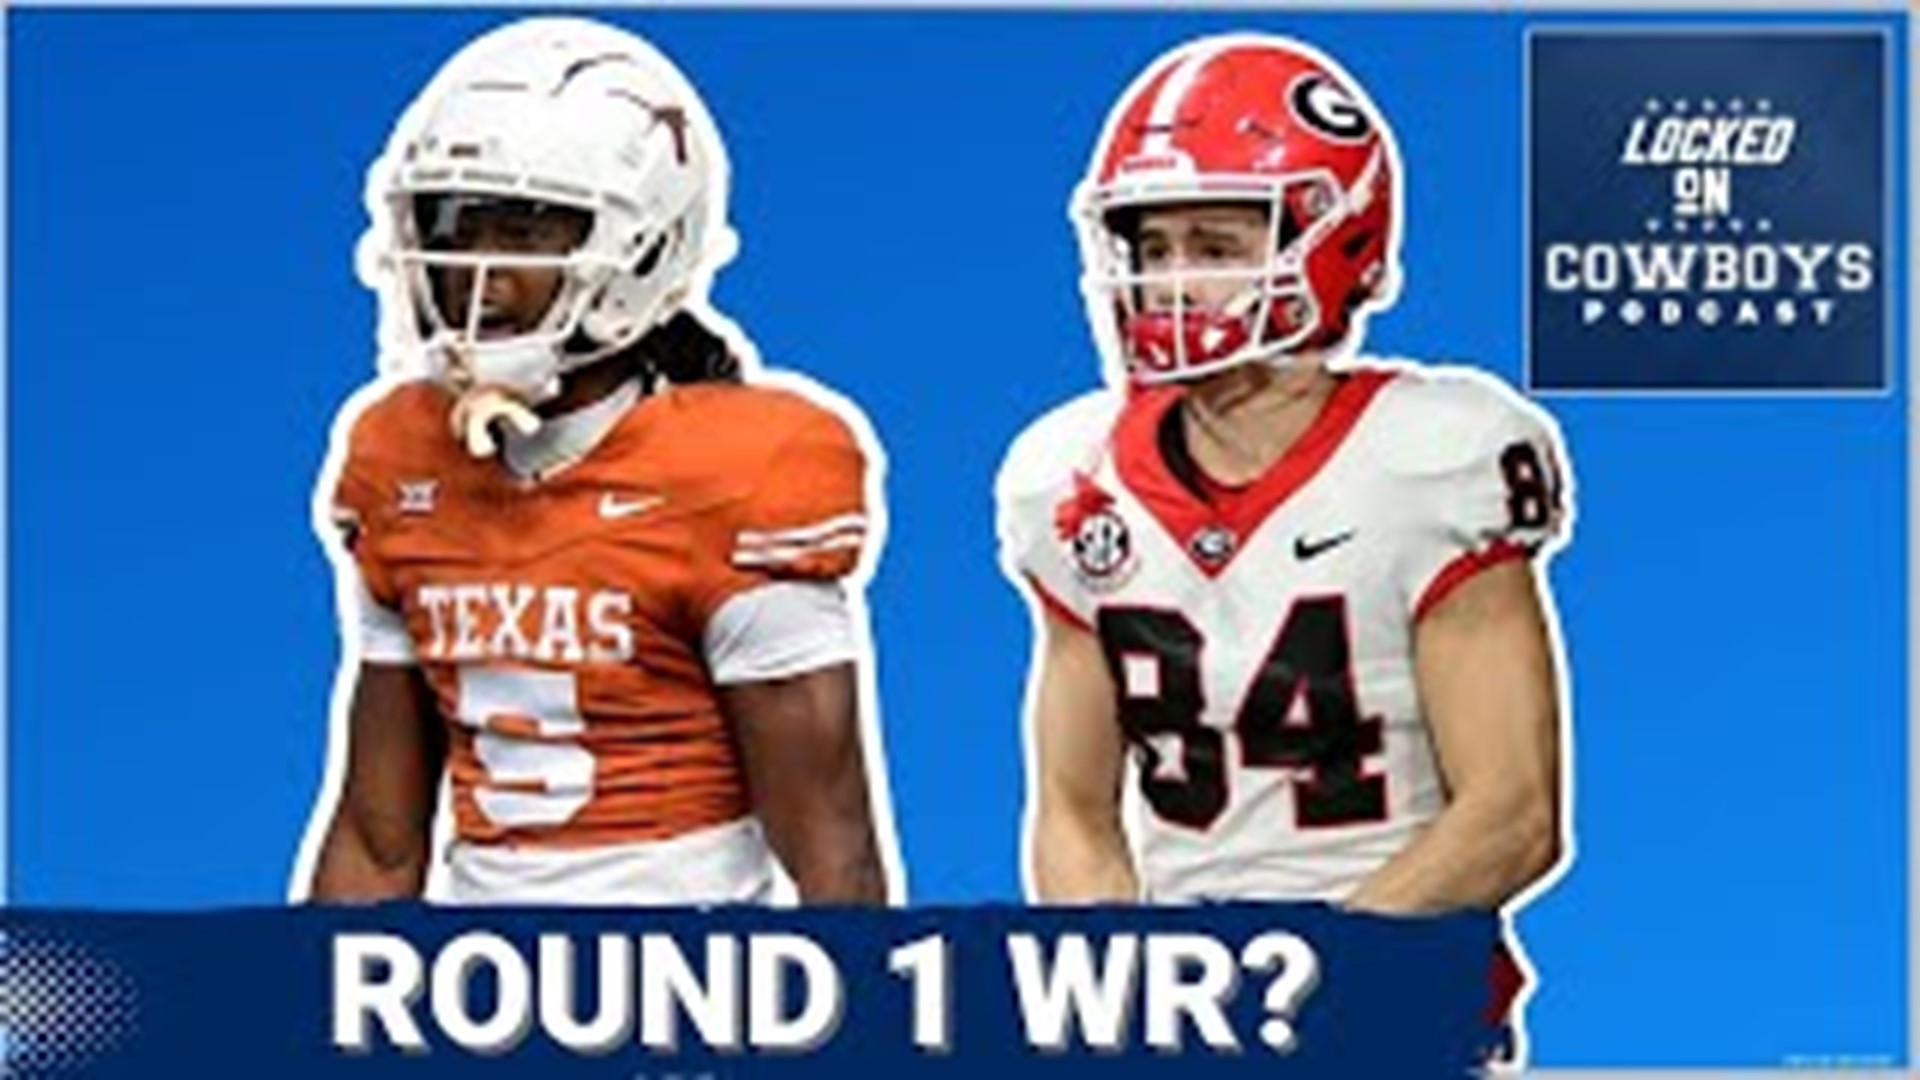 The Dallas Cowboys could be in the market for a wide receiver to pair with CeeDee Lamb. Which Round 1 WR would make the most sense for the Cowboys?